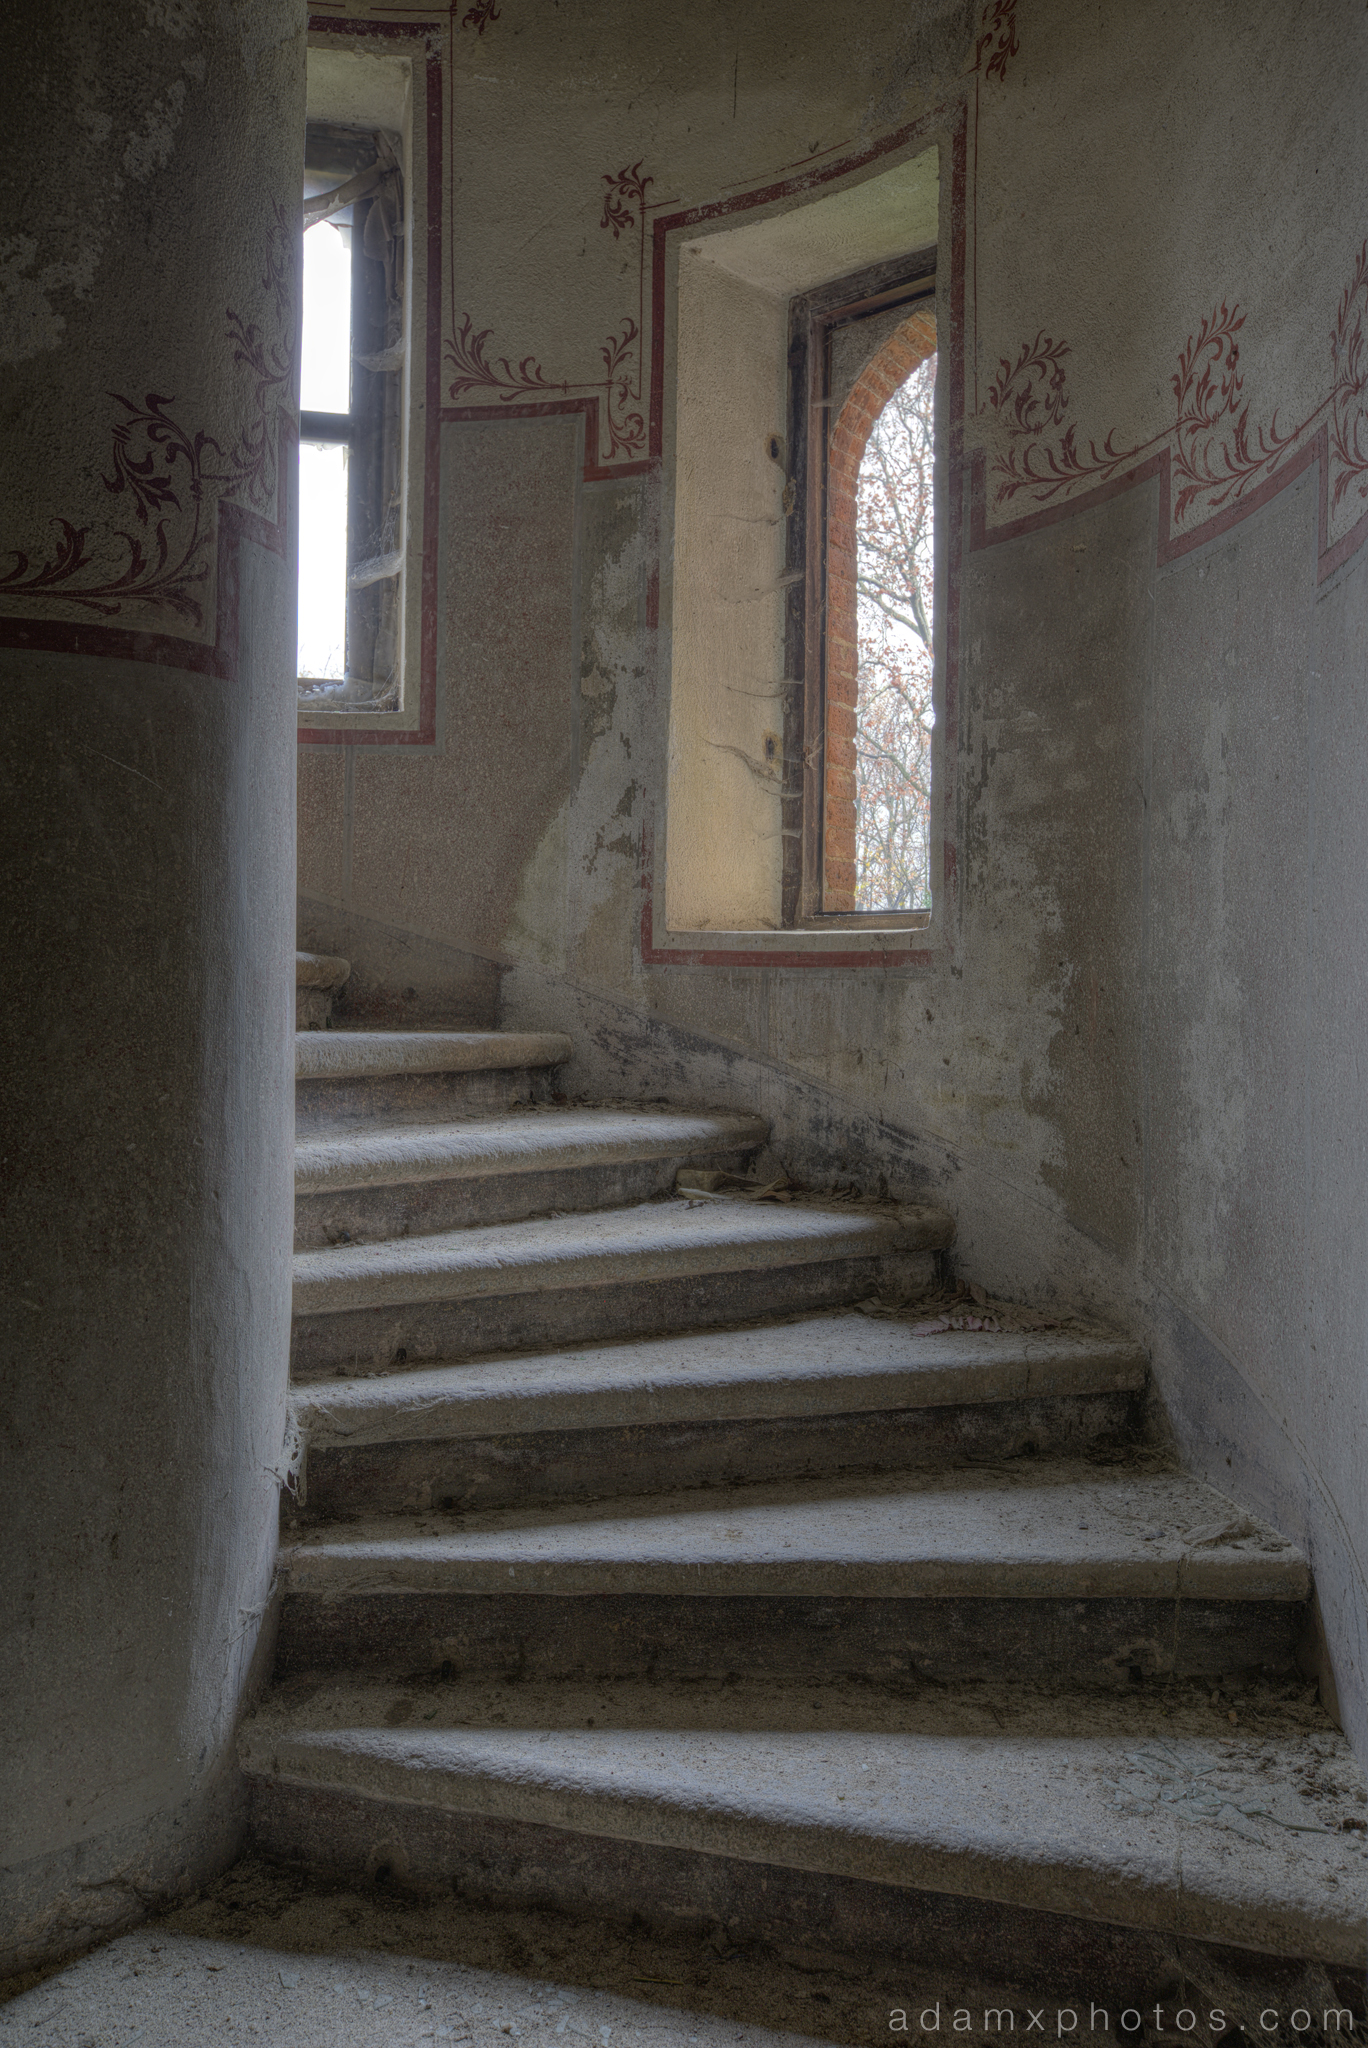 Castello di R Italy castle Urbex Adam X Urban Exploration spiral stairs staircase stone painting painted photo photos report decay detail UE abandoned derelict unused empty disused decay decayed decaying grimy grime